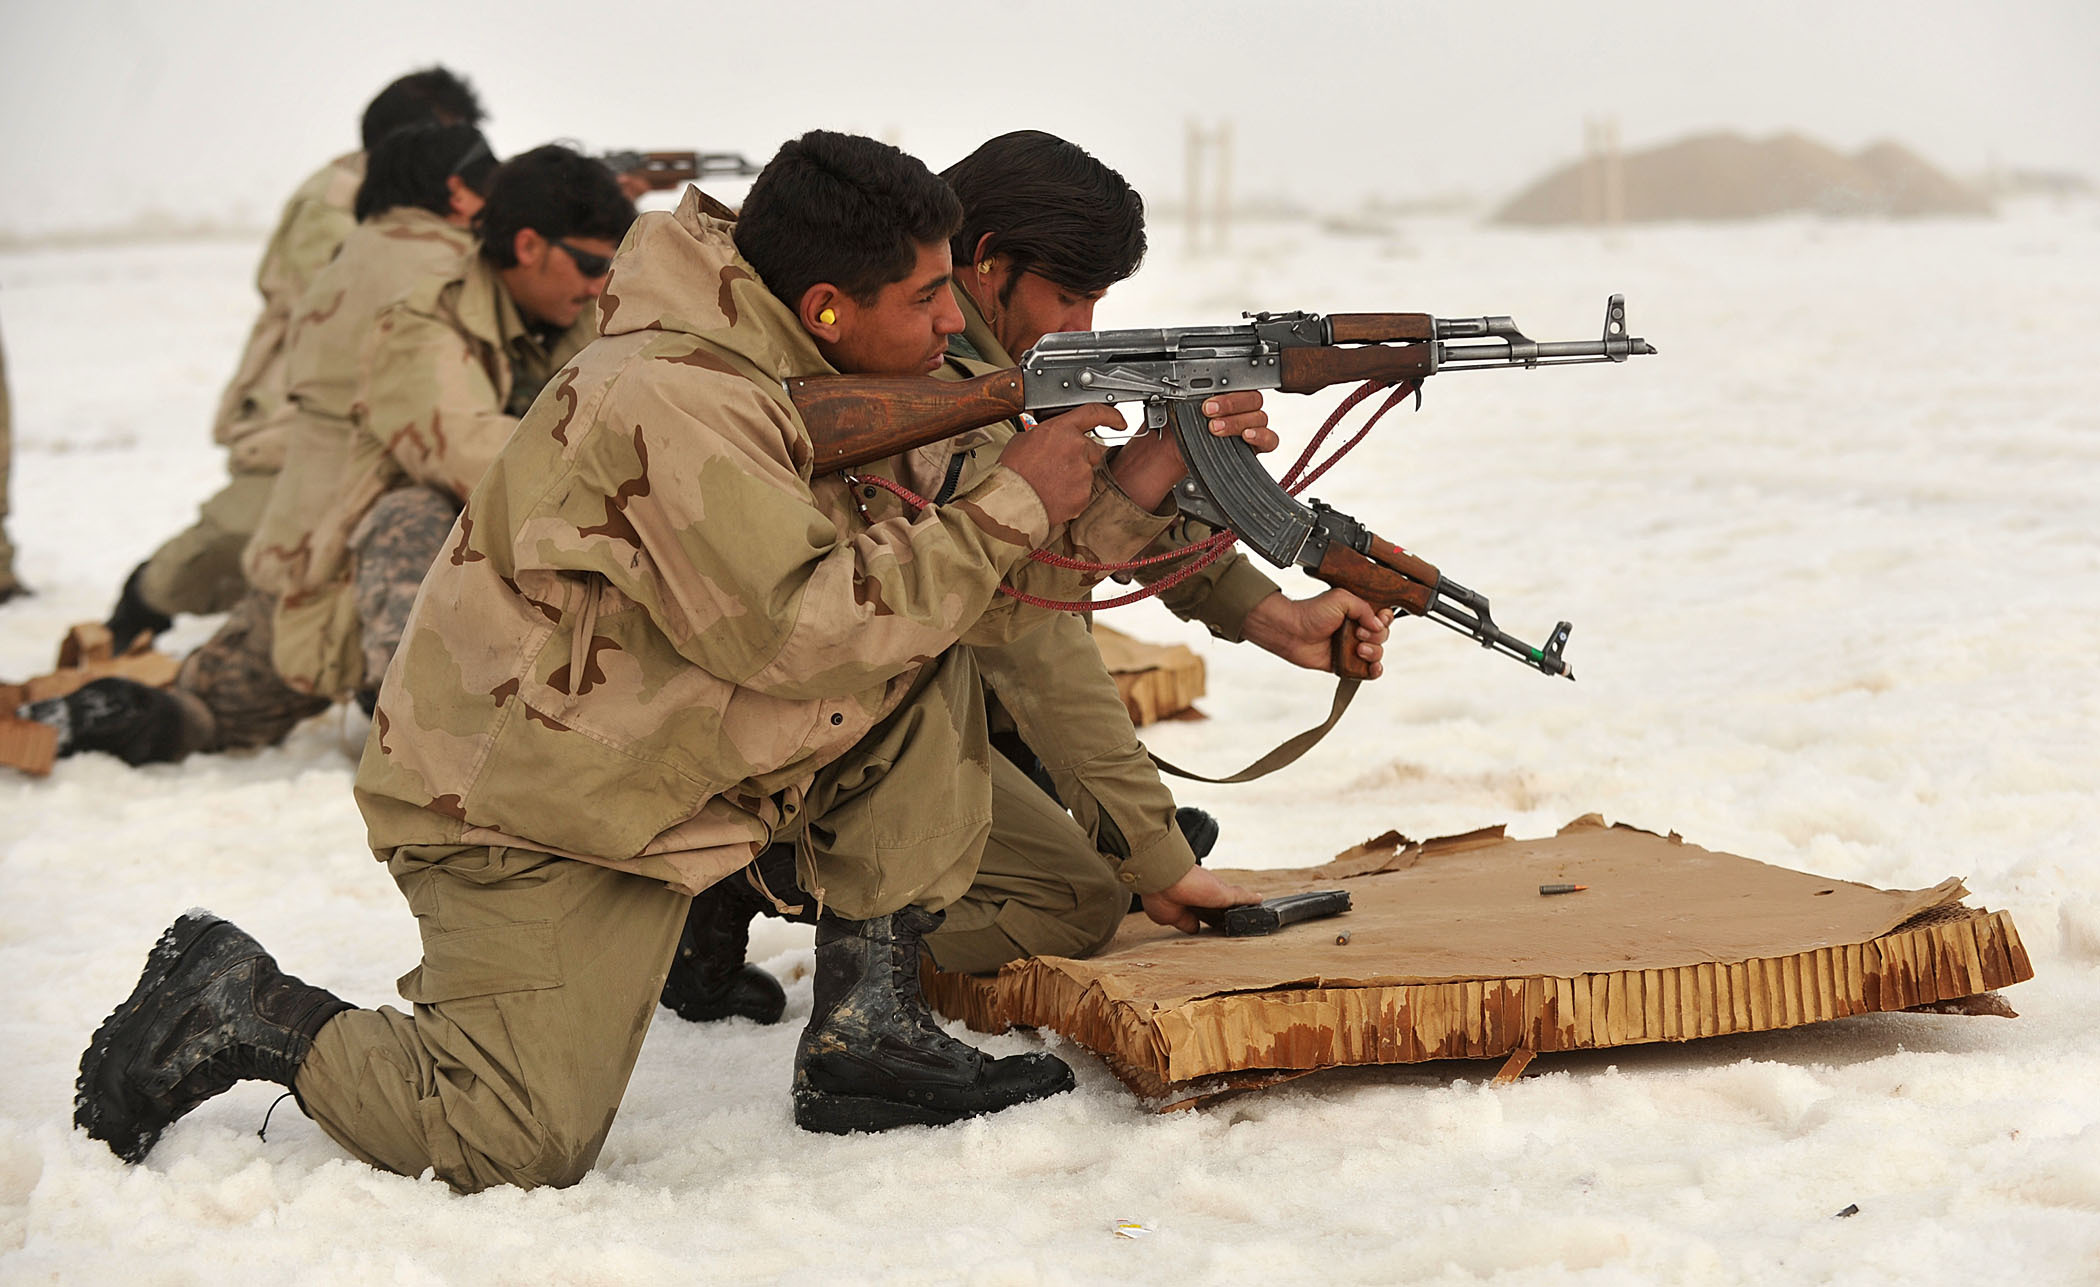 Members of the Afghan National Police and Afghan Local Police fire their AK-47 rifles from the kneeling position during weapons training in Nawbahar district, Zabul province, Afghanistan, March 1. The ANP and ALP work with other Afghan National Security Forces to provide security and stability in the district.